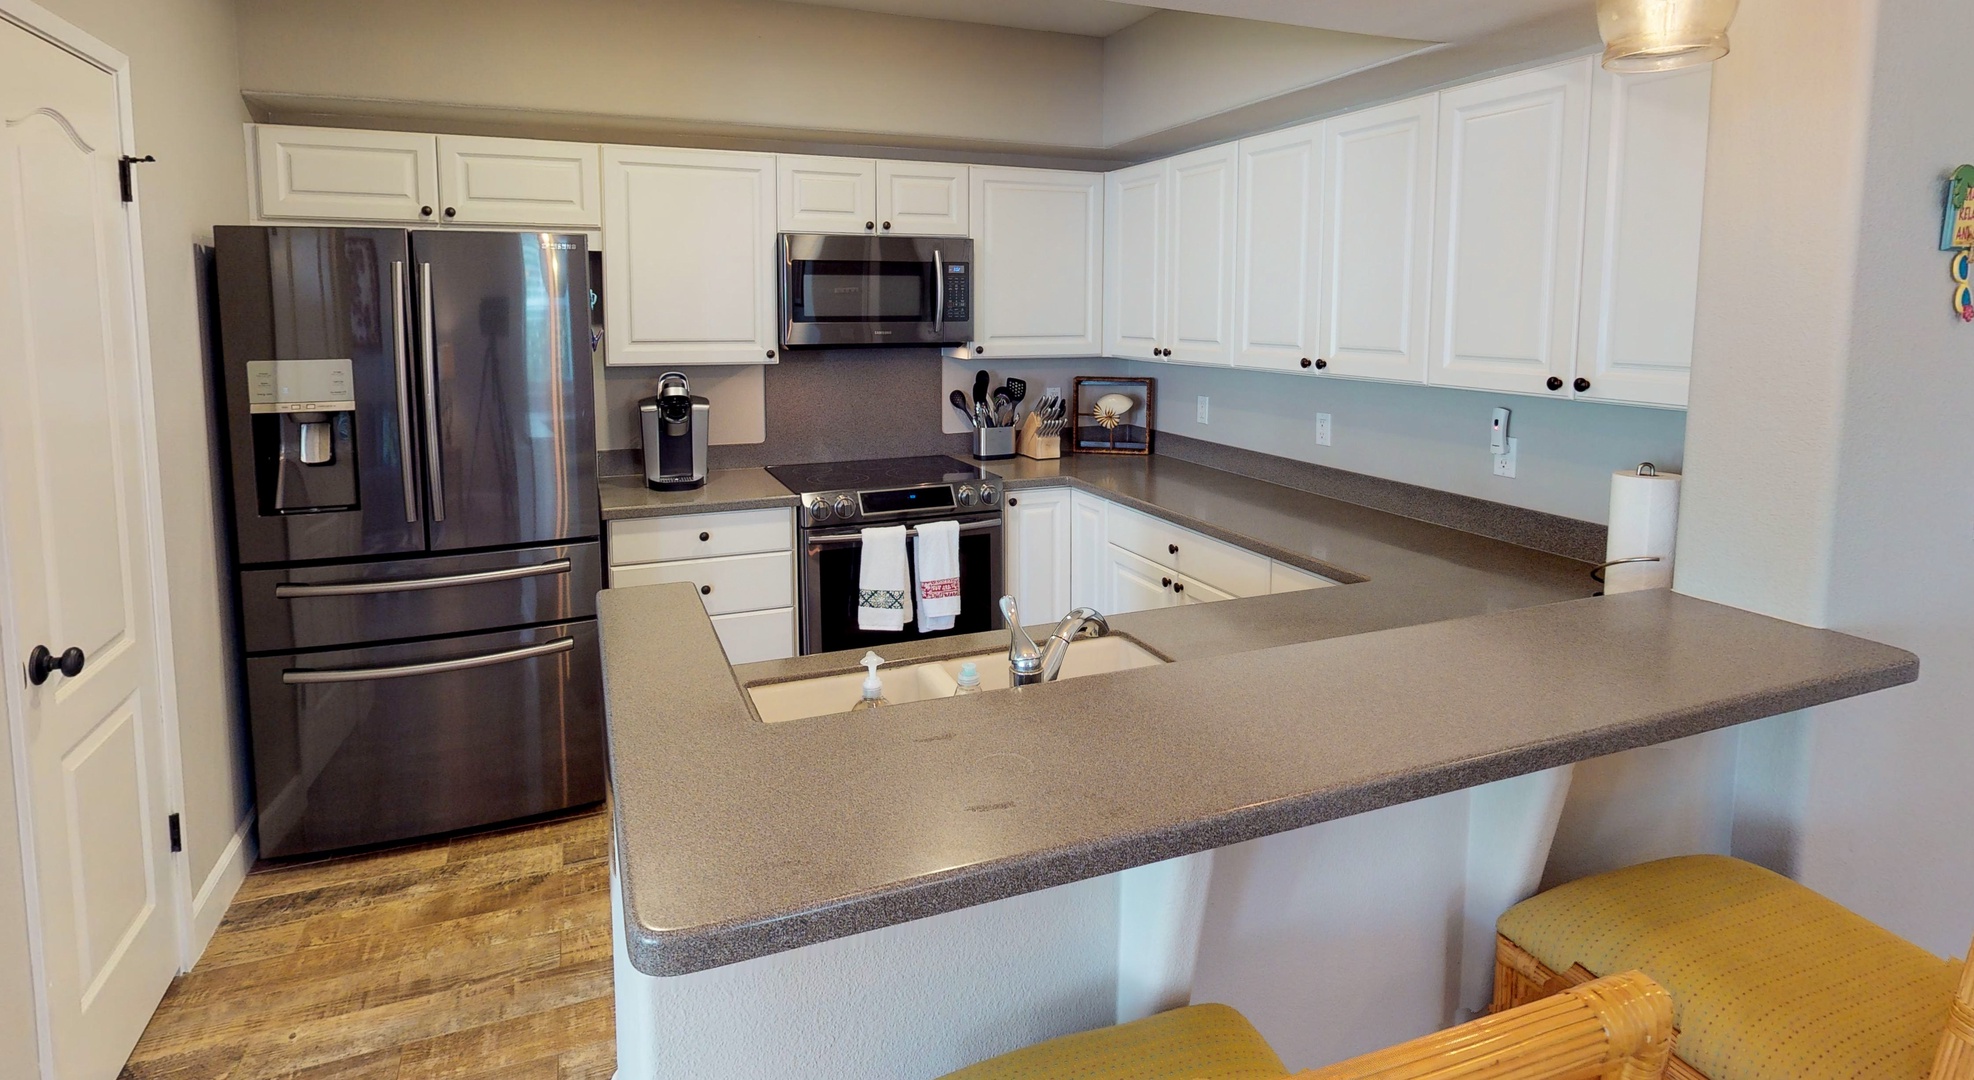 Kapolei Vacation Rentals, Ko Olina Kai 1051A - The bright open kitchen with all the amenities you need for your culinary adventures.